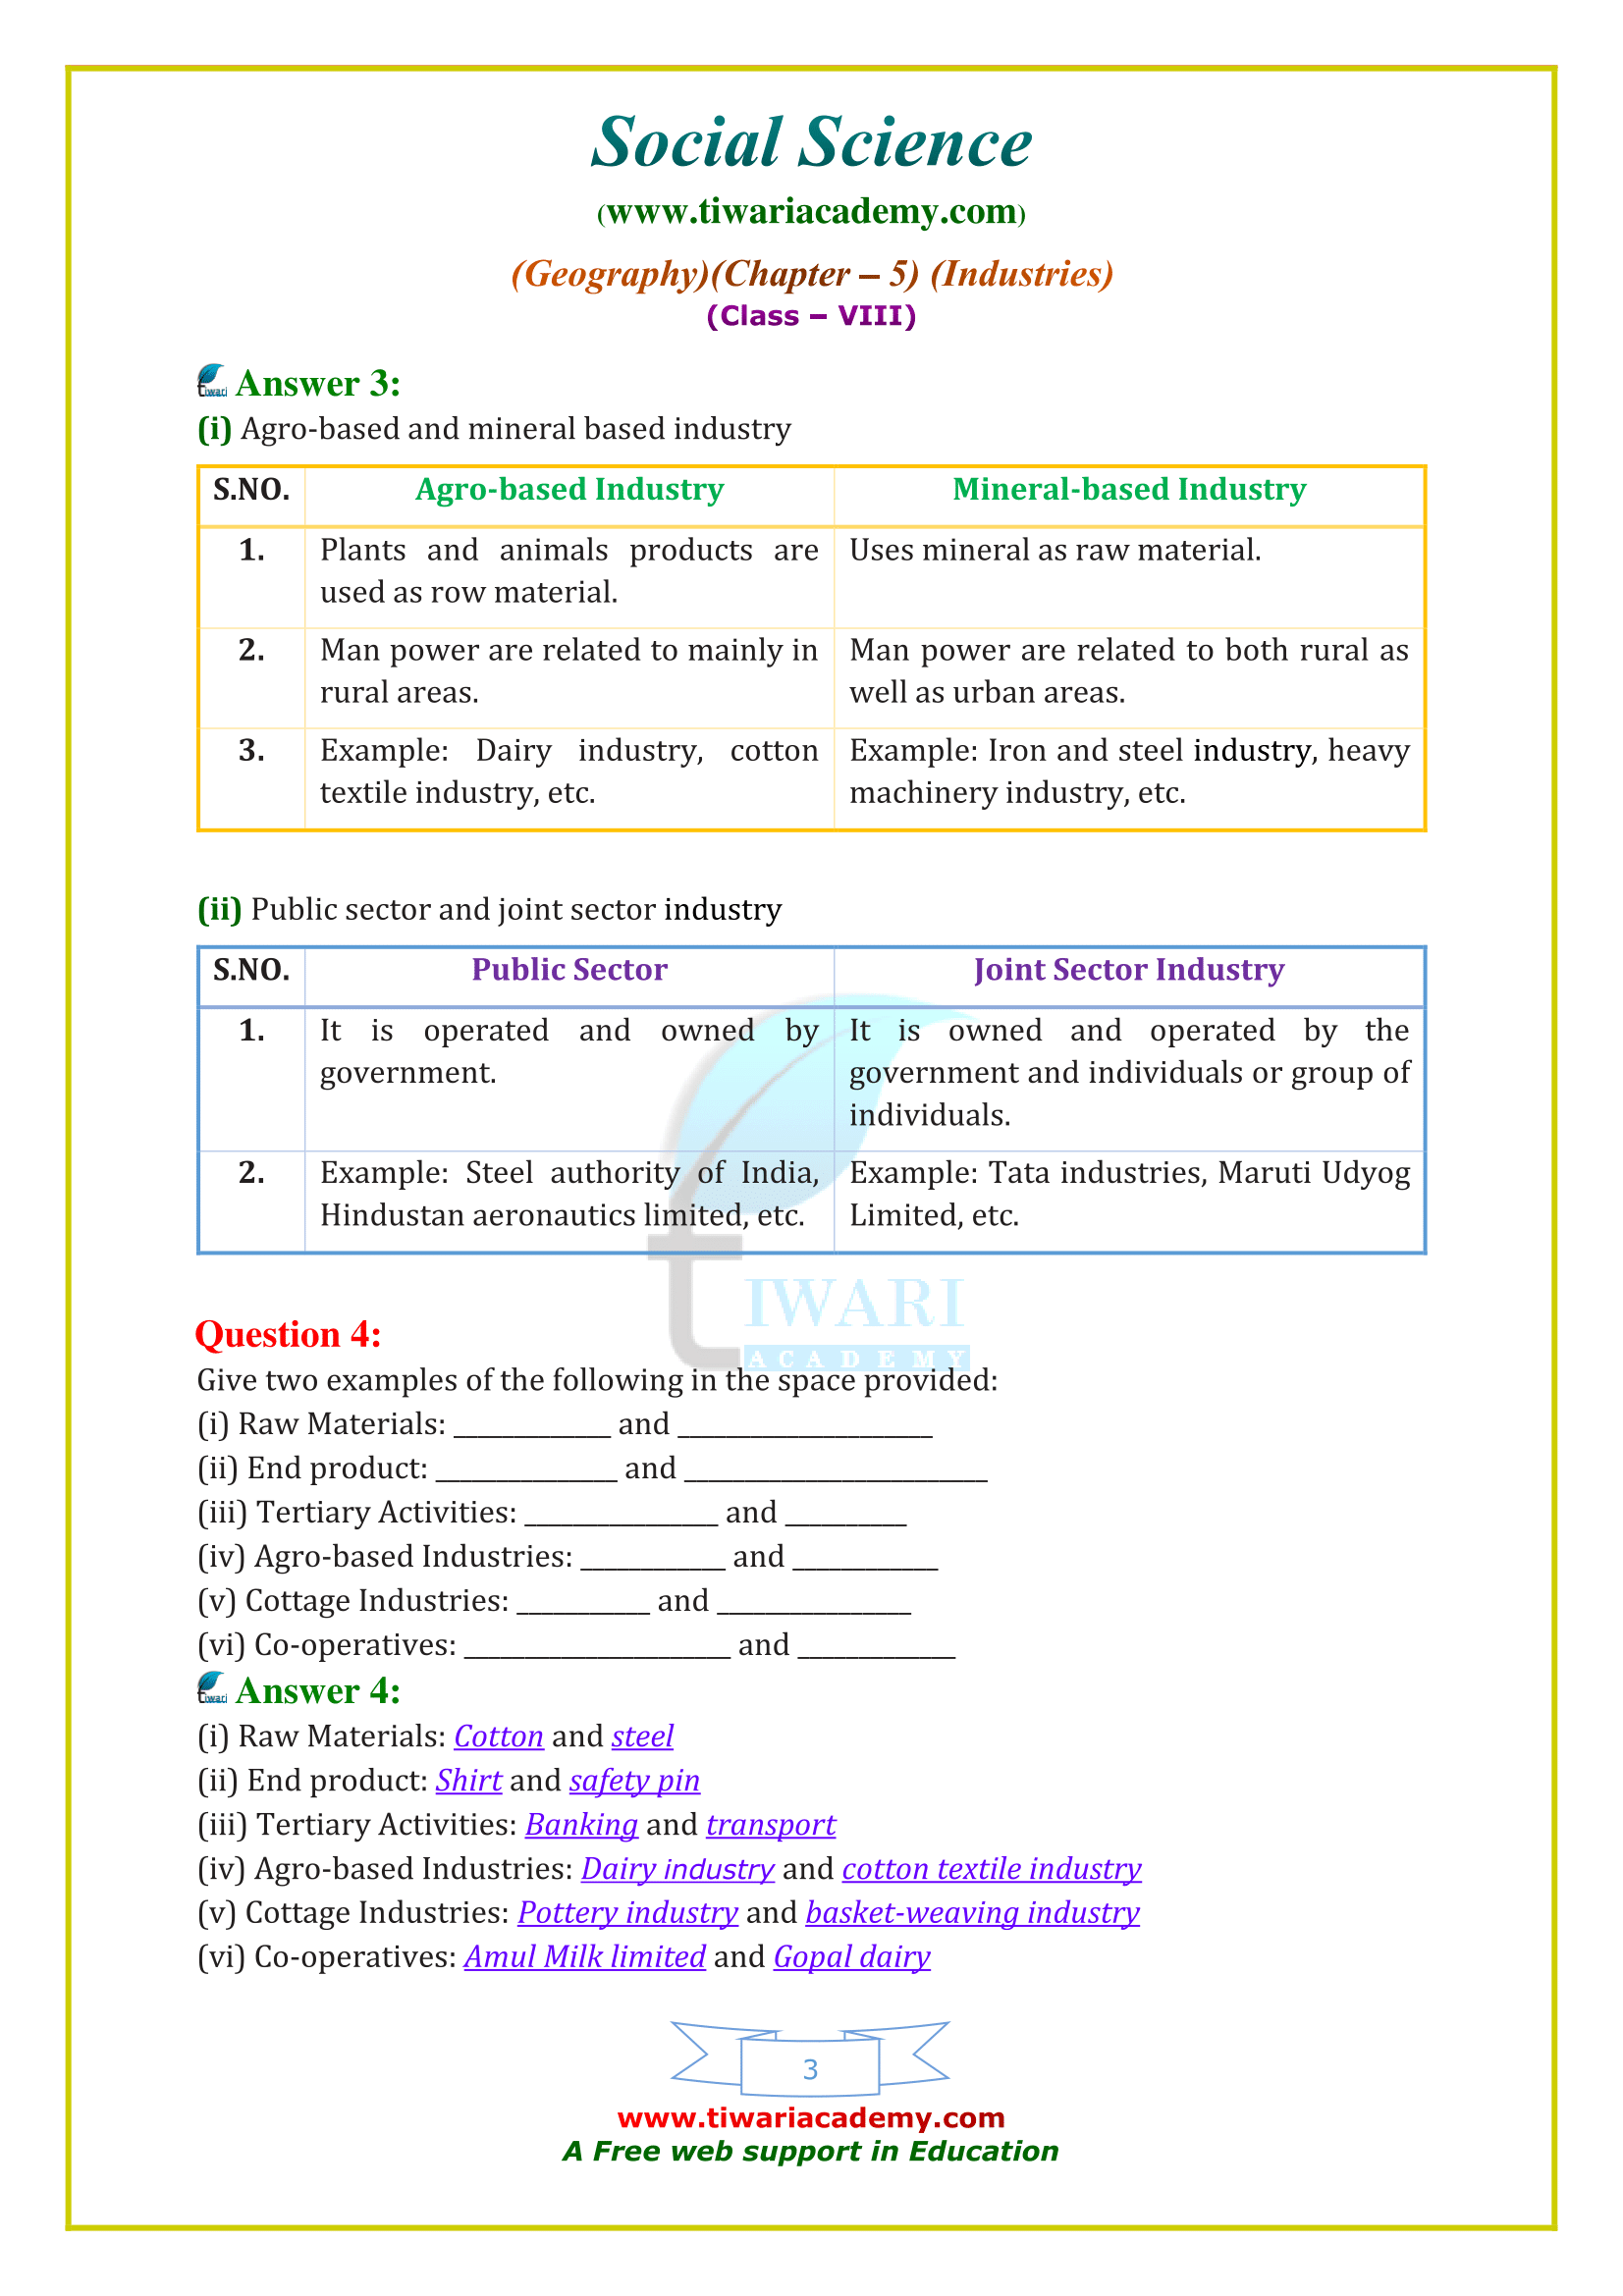 8th goegraphy ch. 5 answers